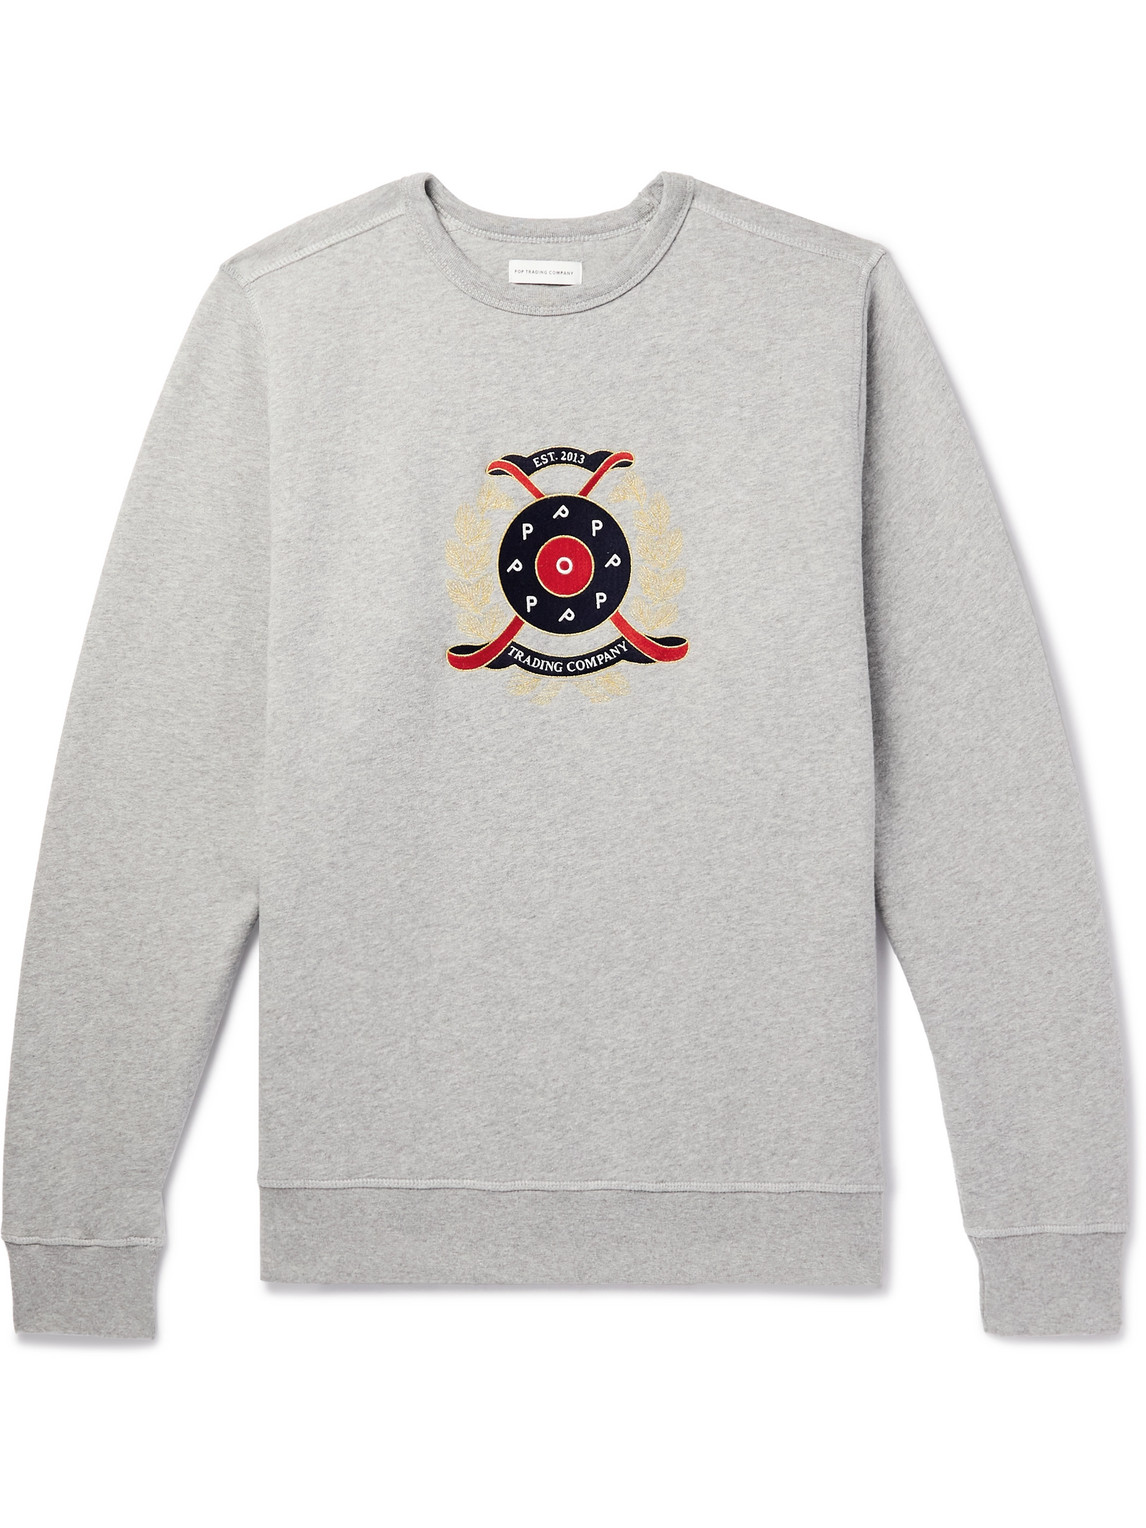 Pop Trading Company LOGO-EMBROIDERED COTTON-BLEND JERSEY SWEATSHIRT